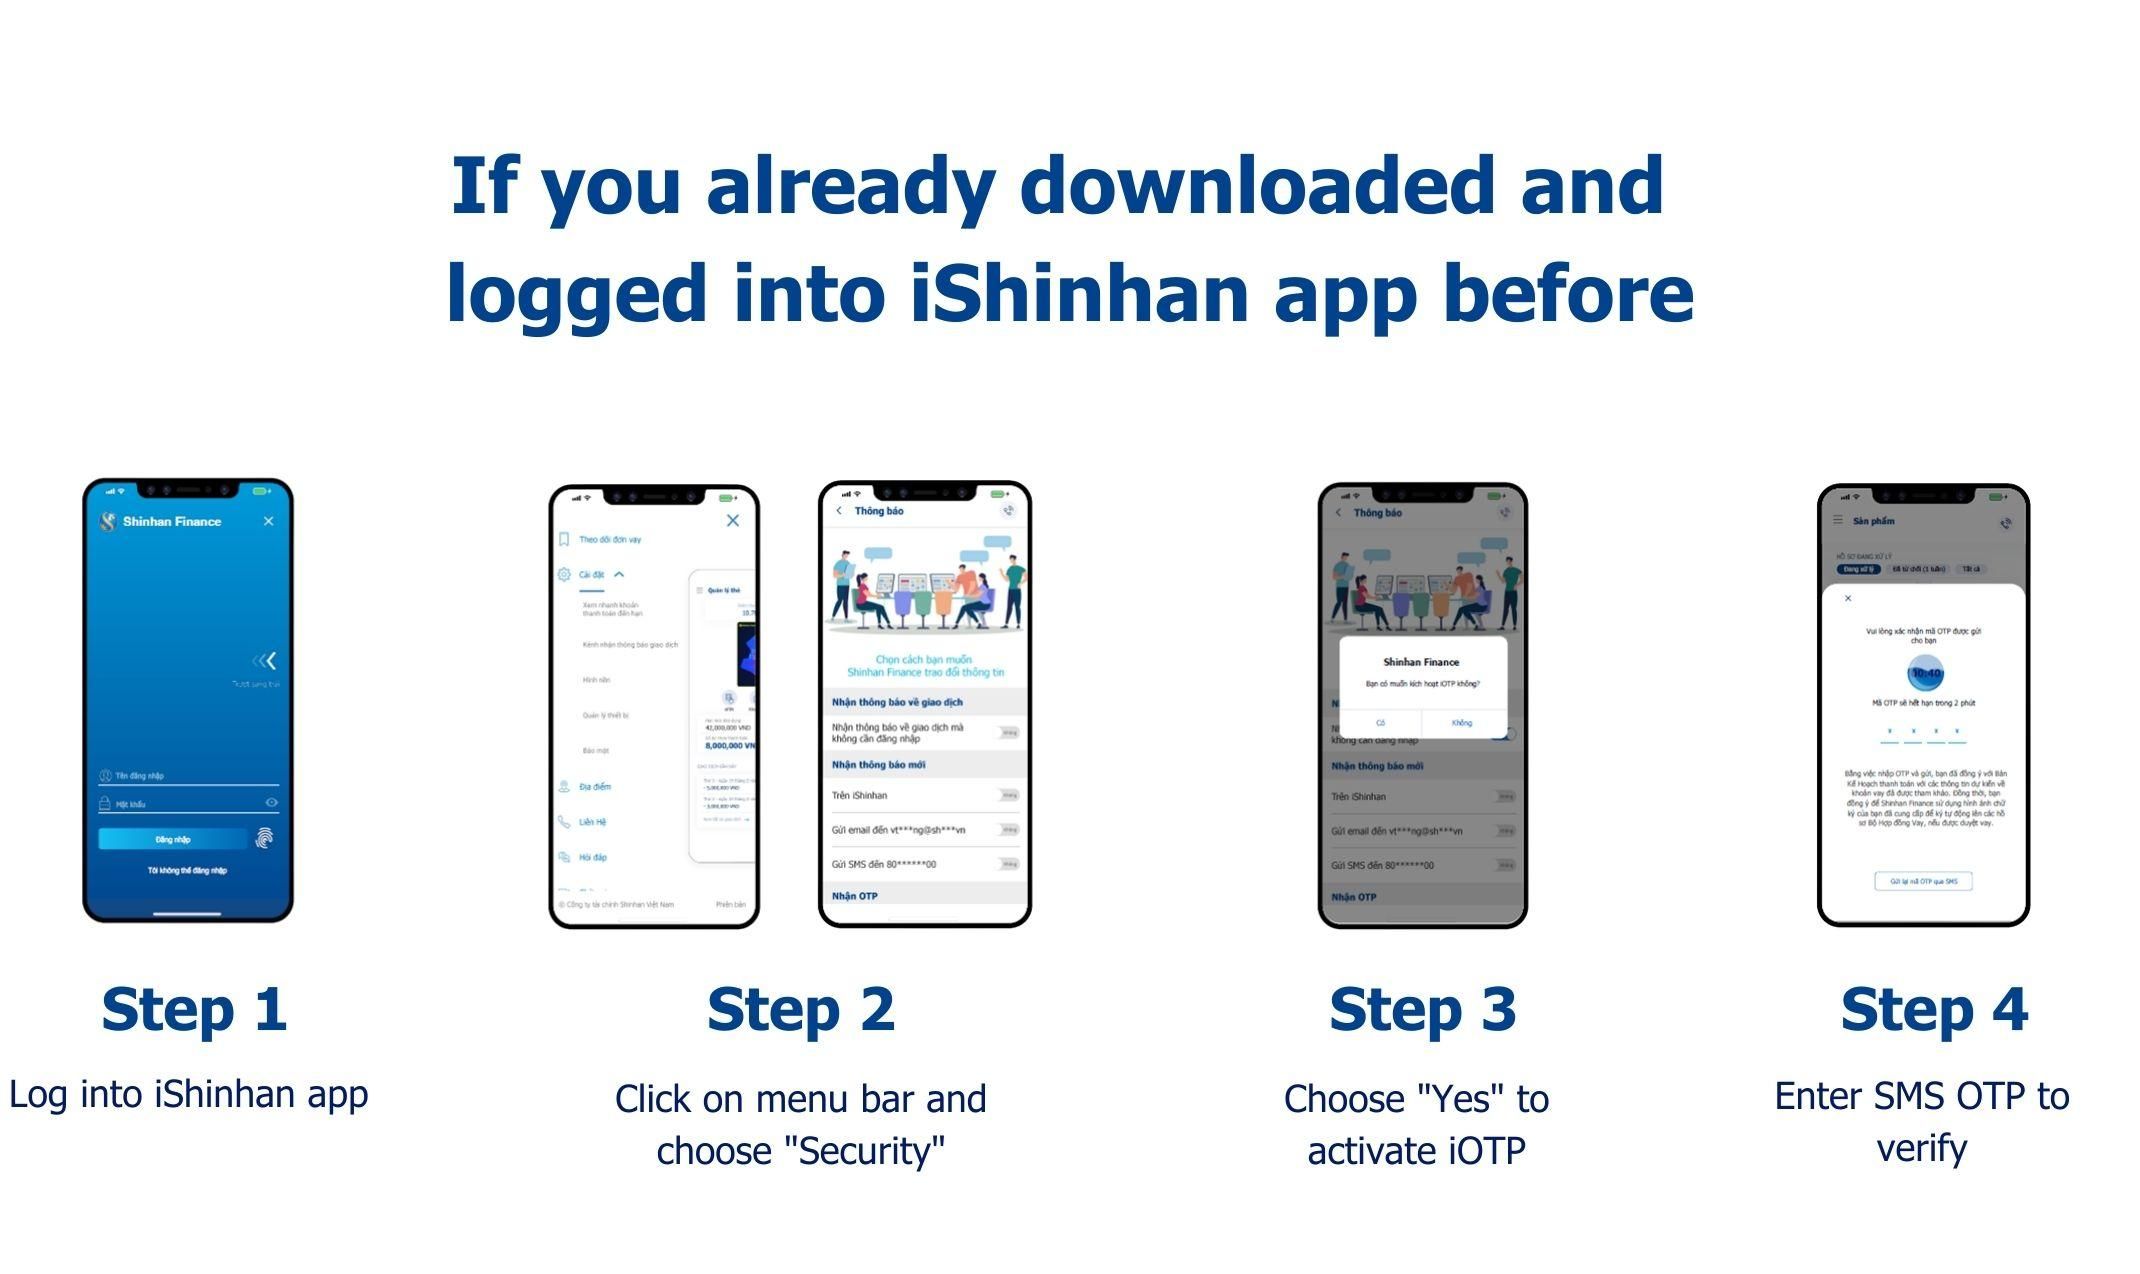 If you already downloaded and logged into iShinhan app before